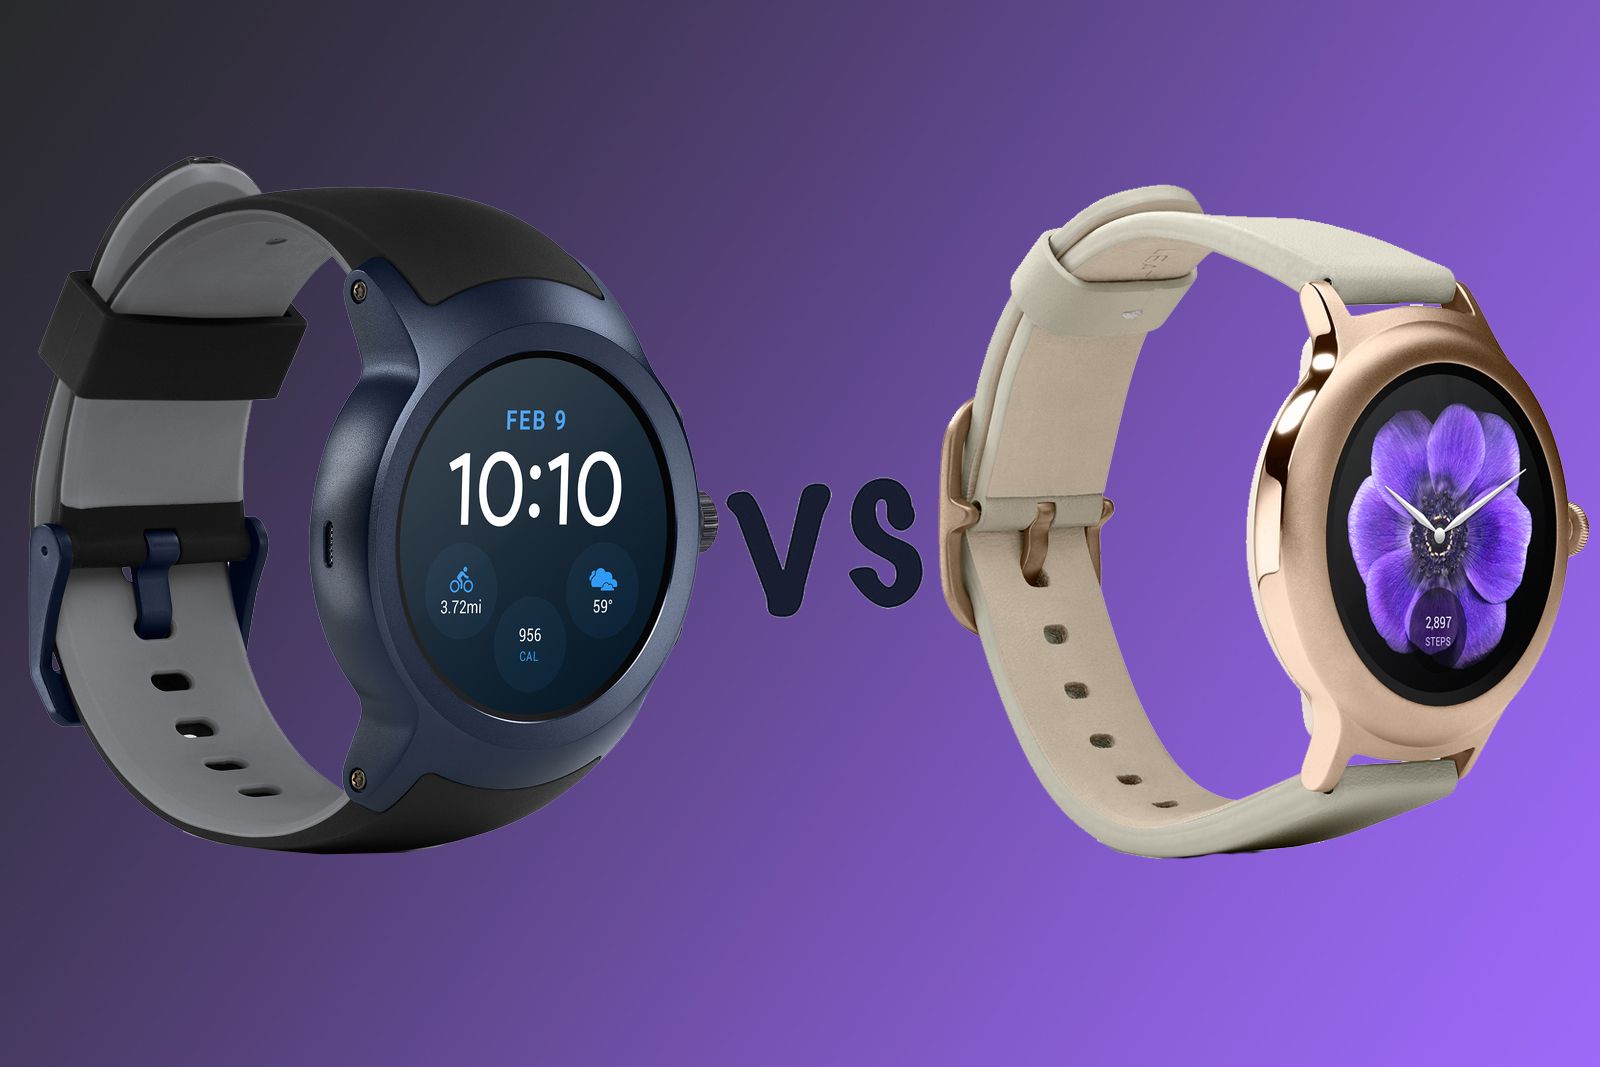 lg watch sport vs lg watch style what’s the difference  image 1